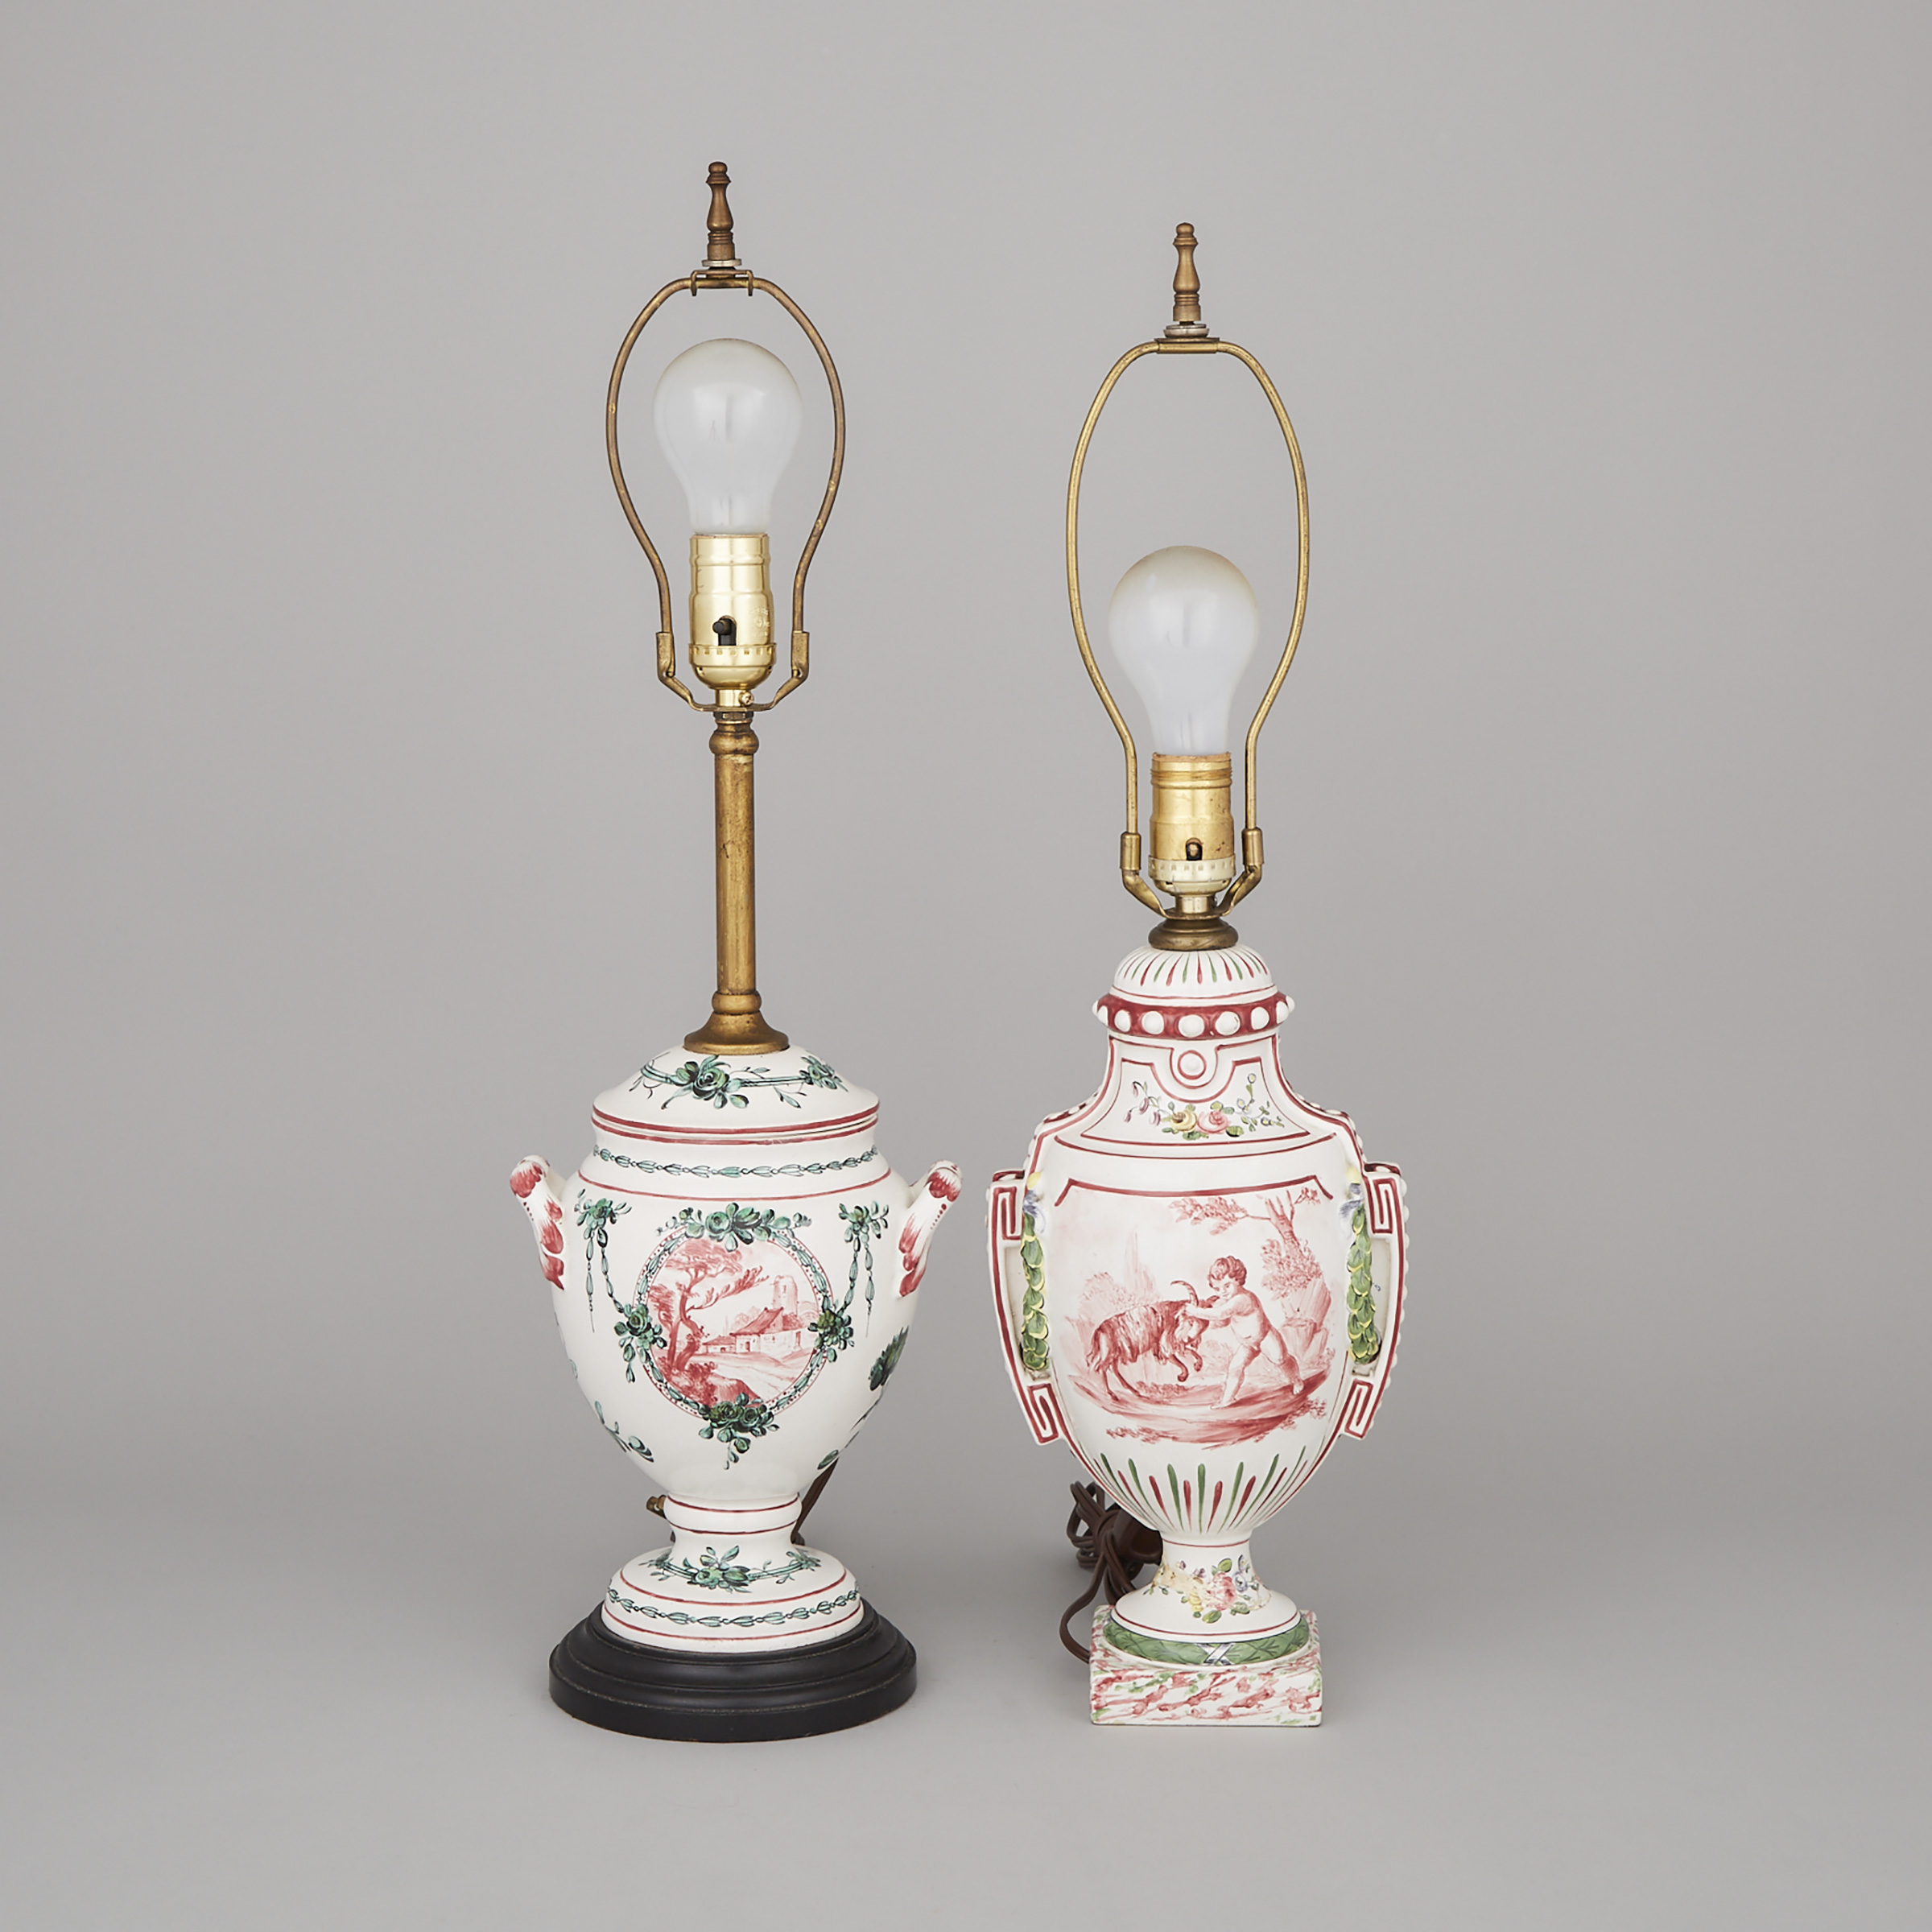 Two French Faience Table Lamps, 19th/20th century